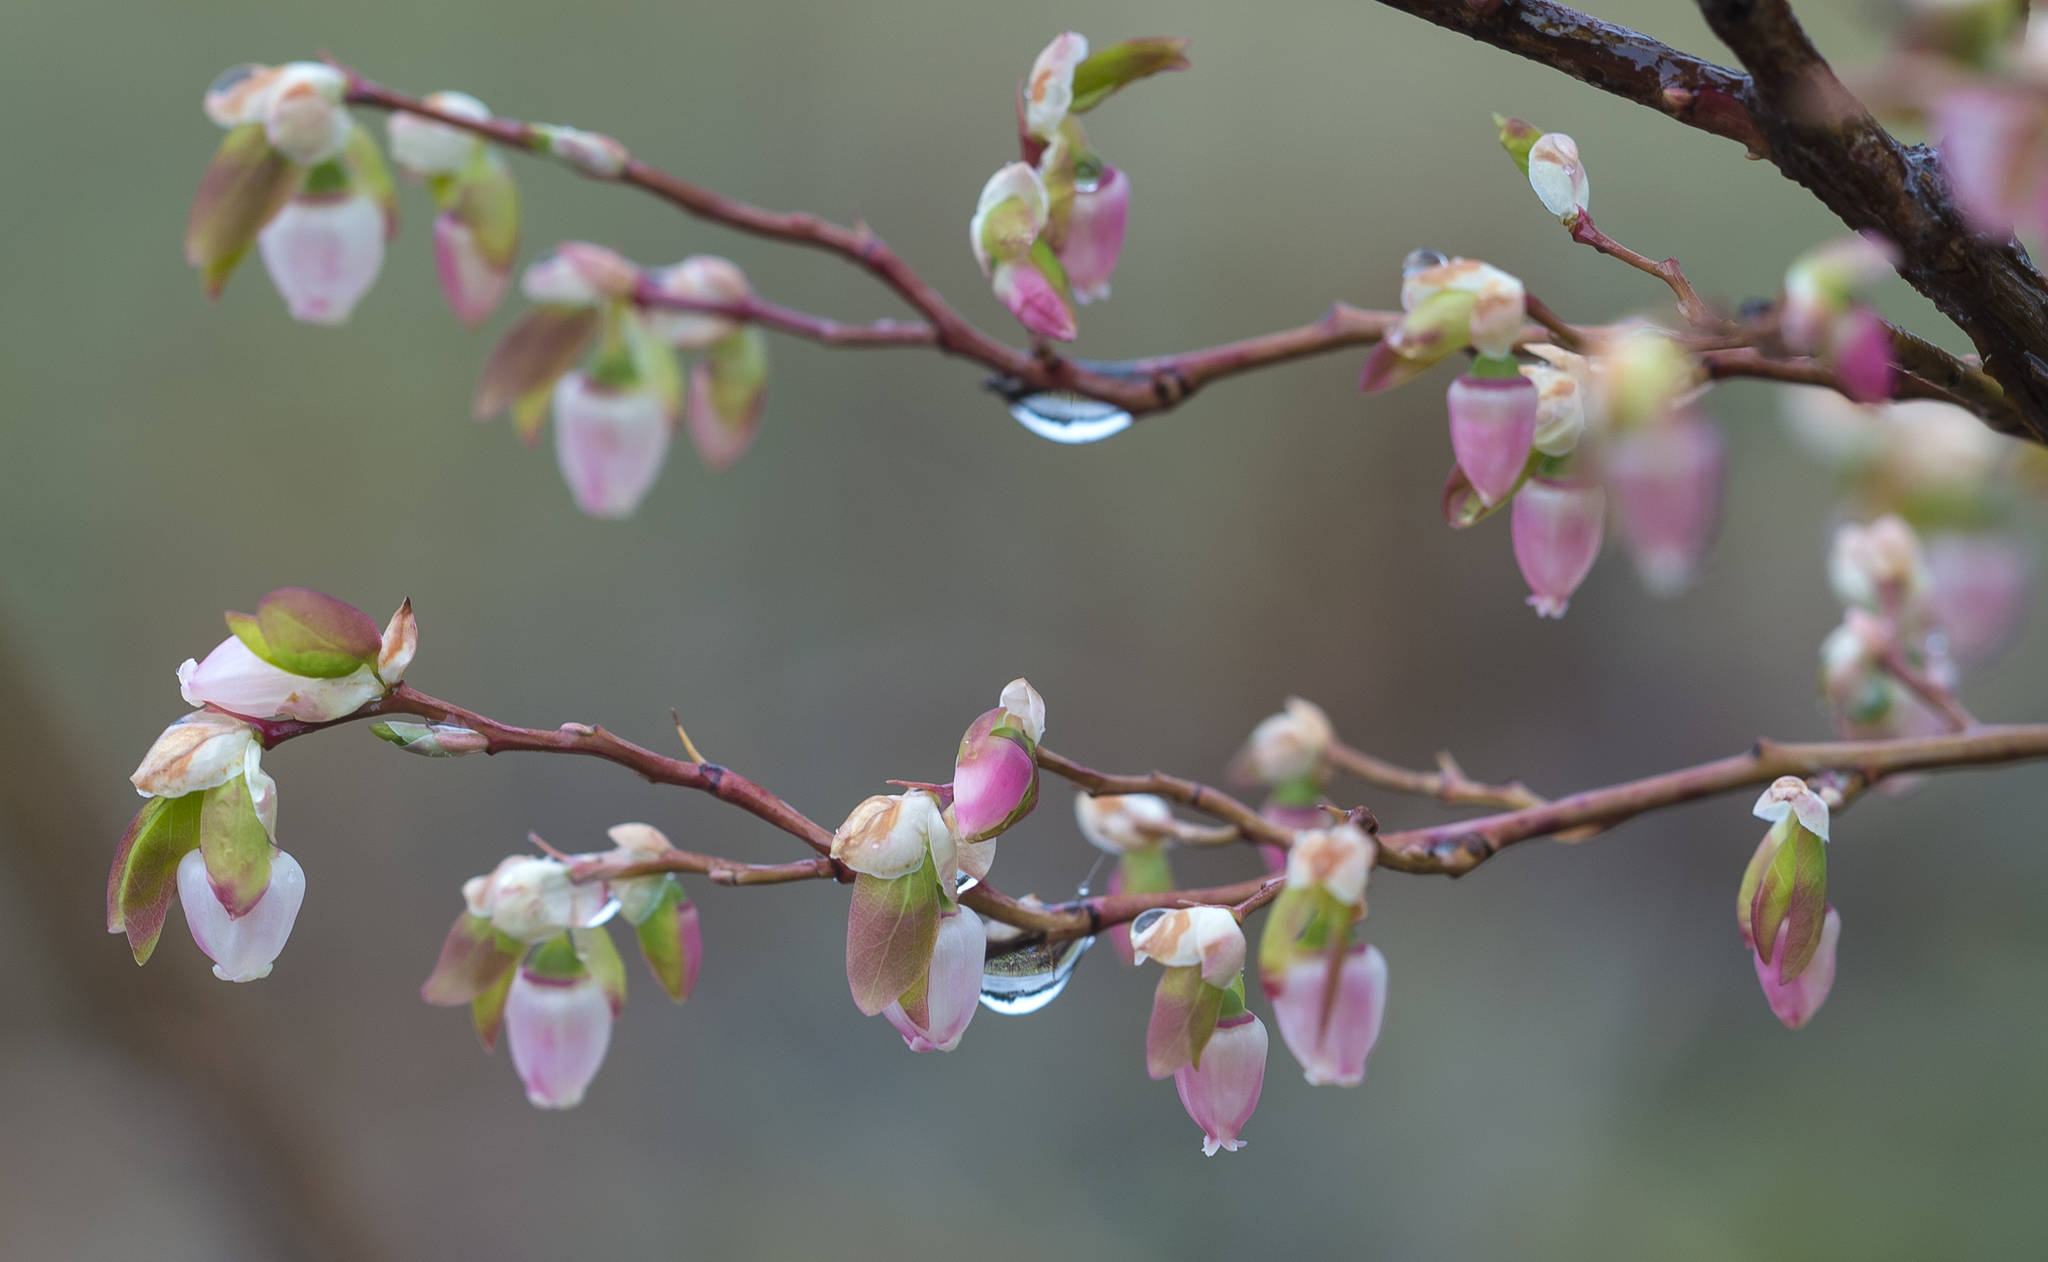 Raindrops dampen blueberry blossoms in Auke Bay on Tuesday, May 1, 2018. (Michael Penn | Juneau Empire)